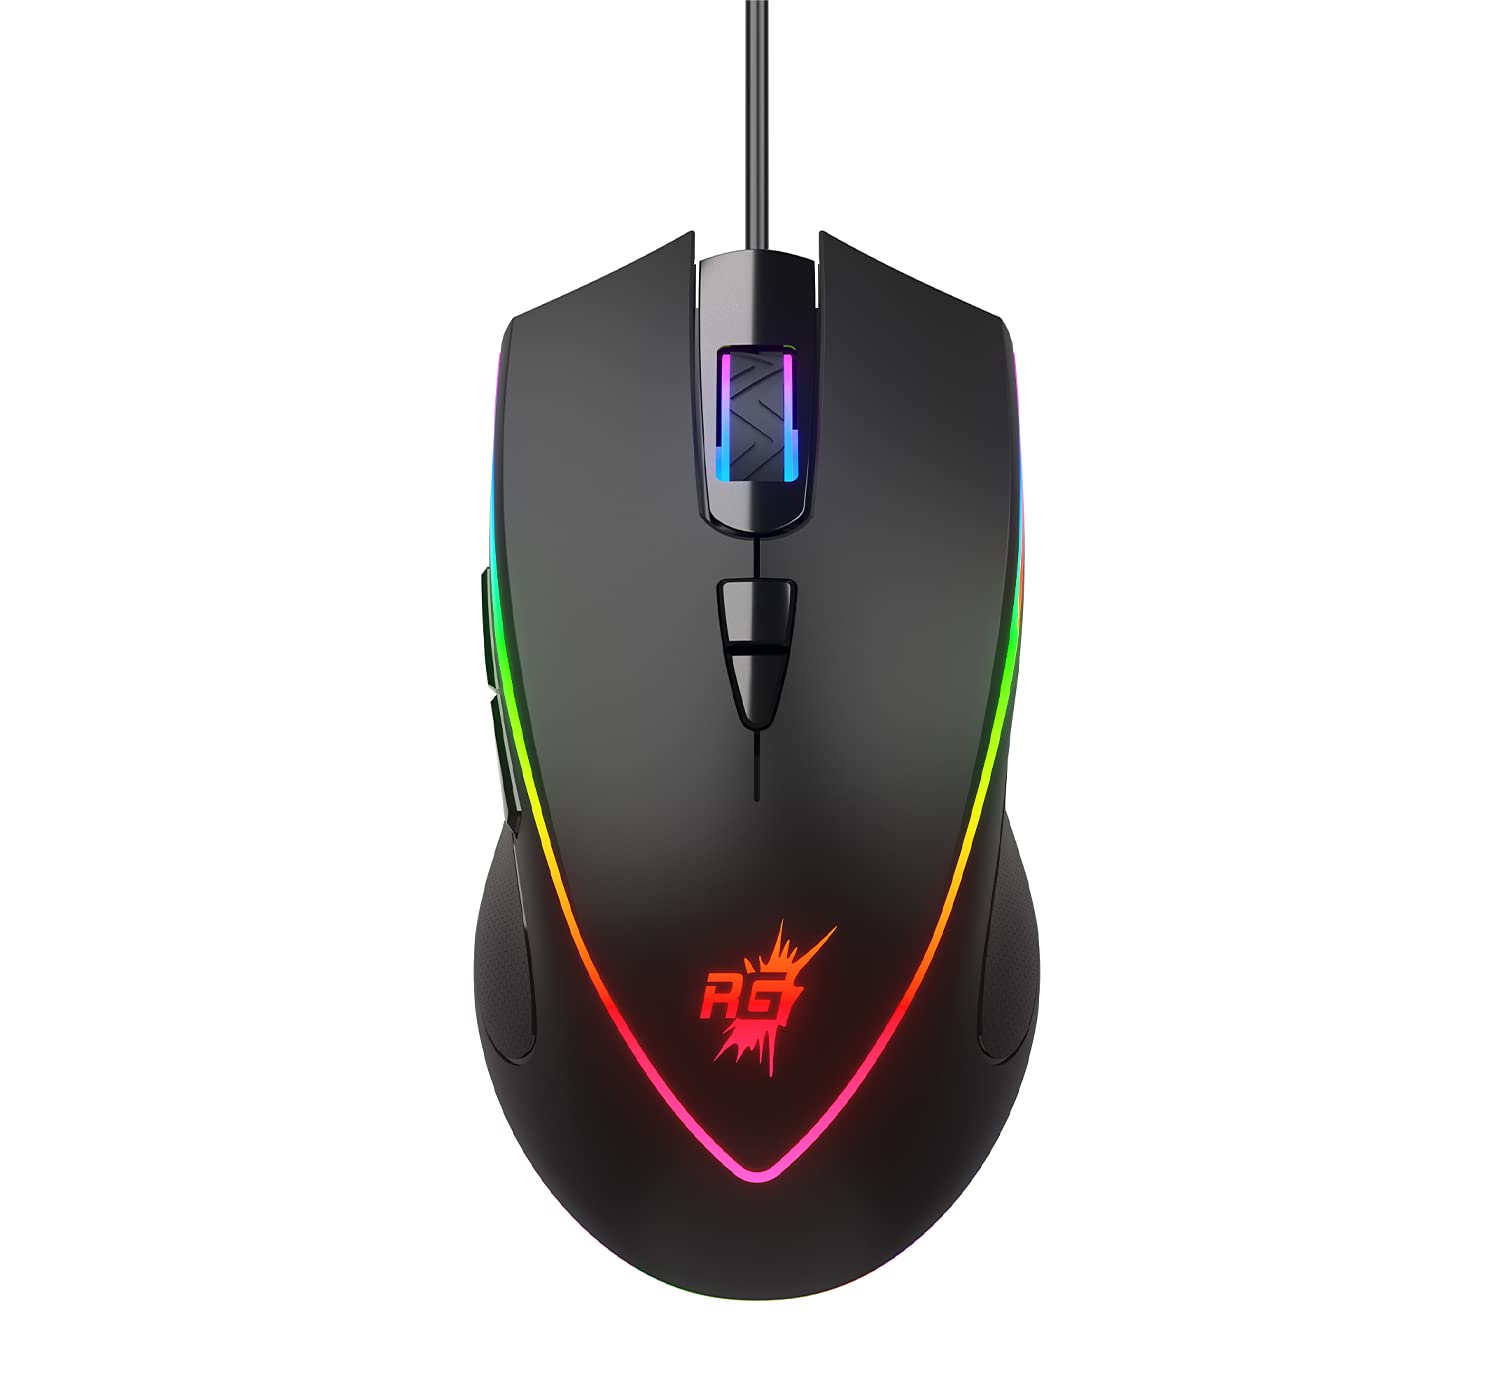 Redgear A-17 USB Wired Gaming Mouse with LED, Upto 6400 DPI